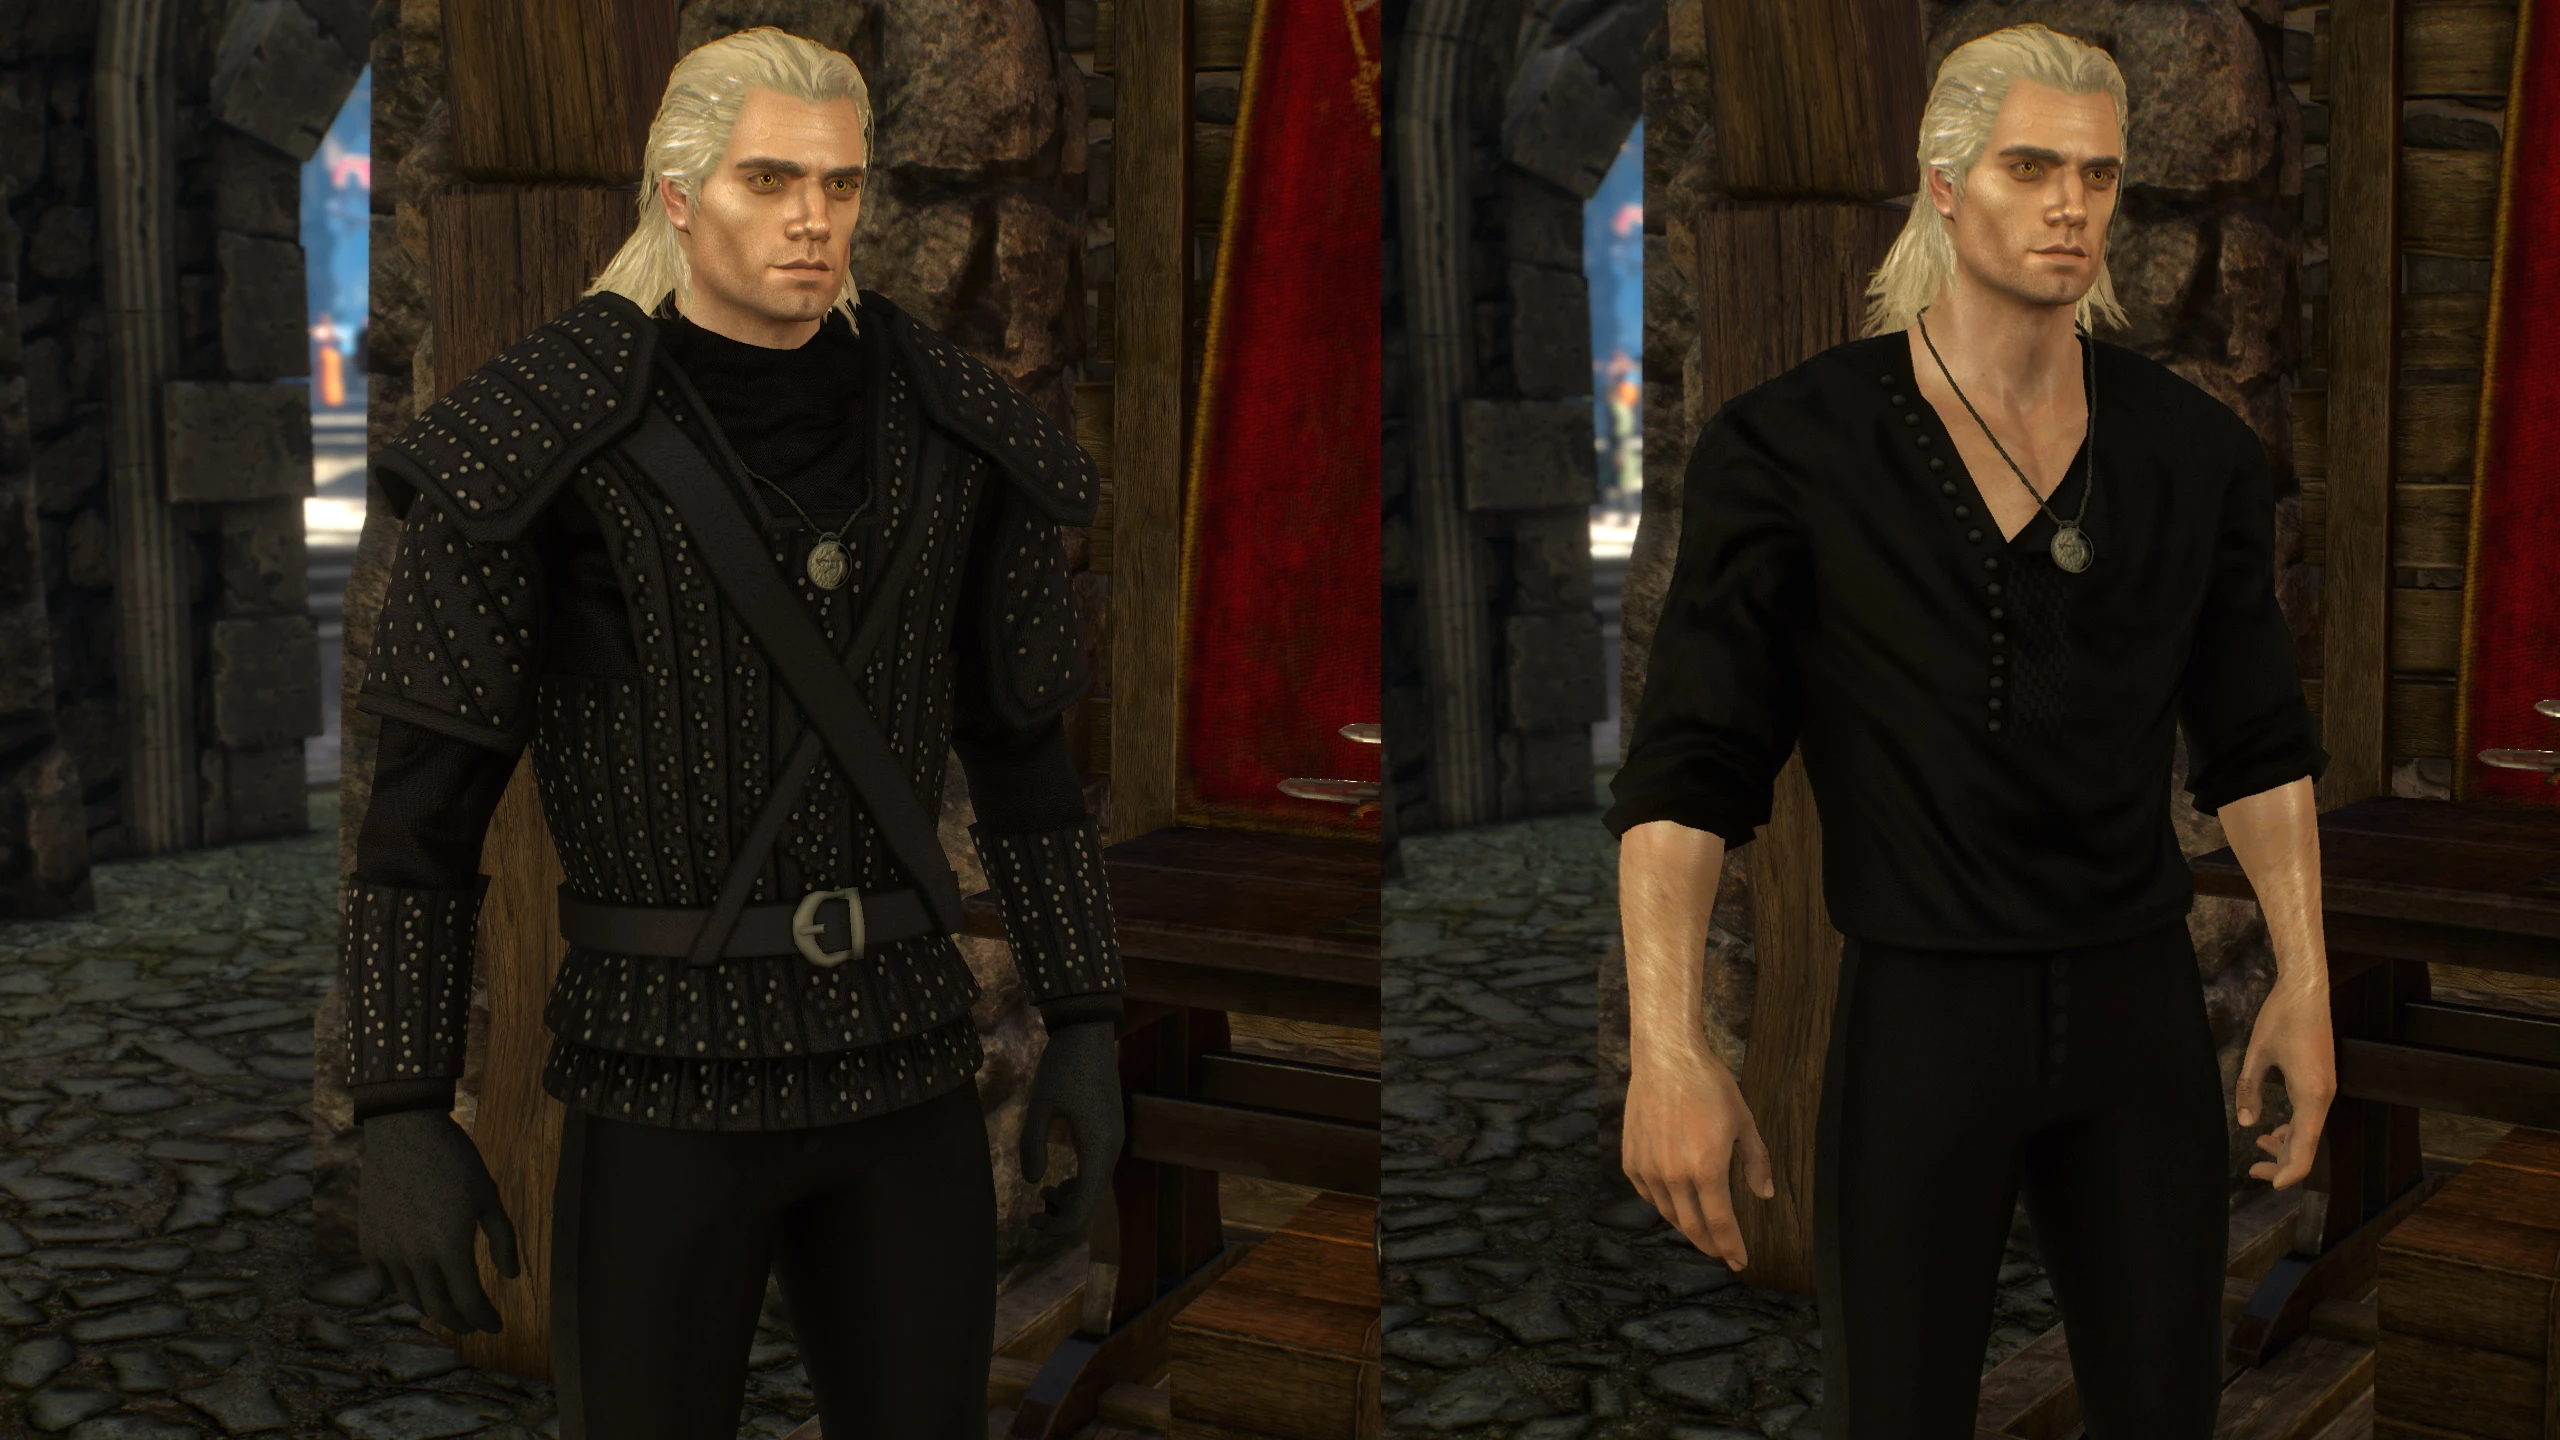 The Witcher 3: how to get Henry Cavill's armor and enable Netflix contents  - Meristation